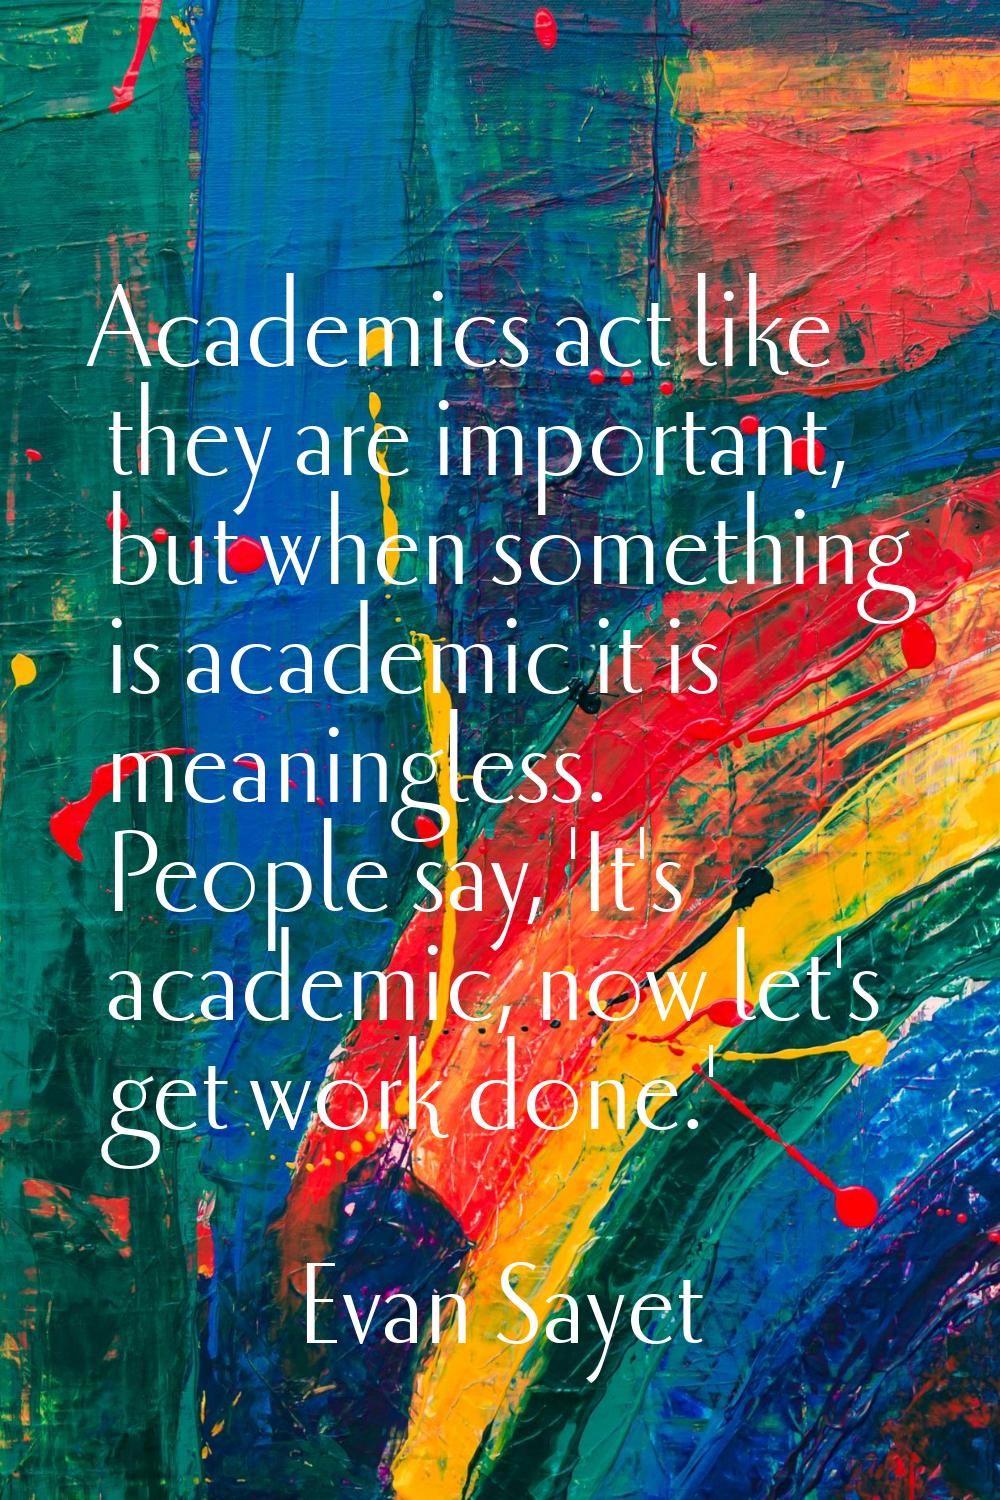 Academics act like they are important, but when something is academic it is meaningless. People say